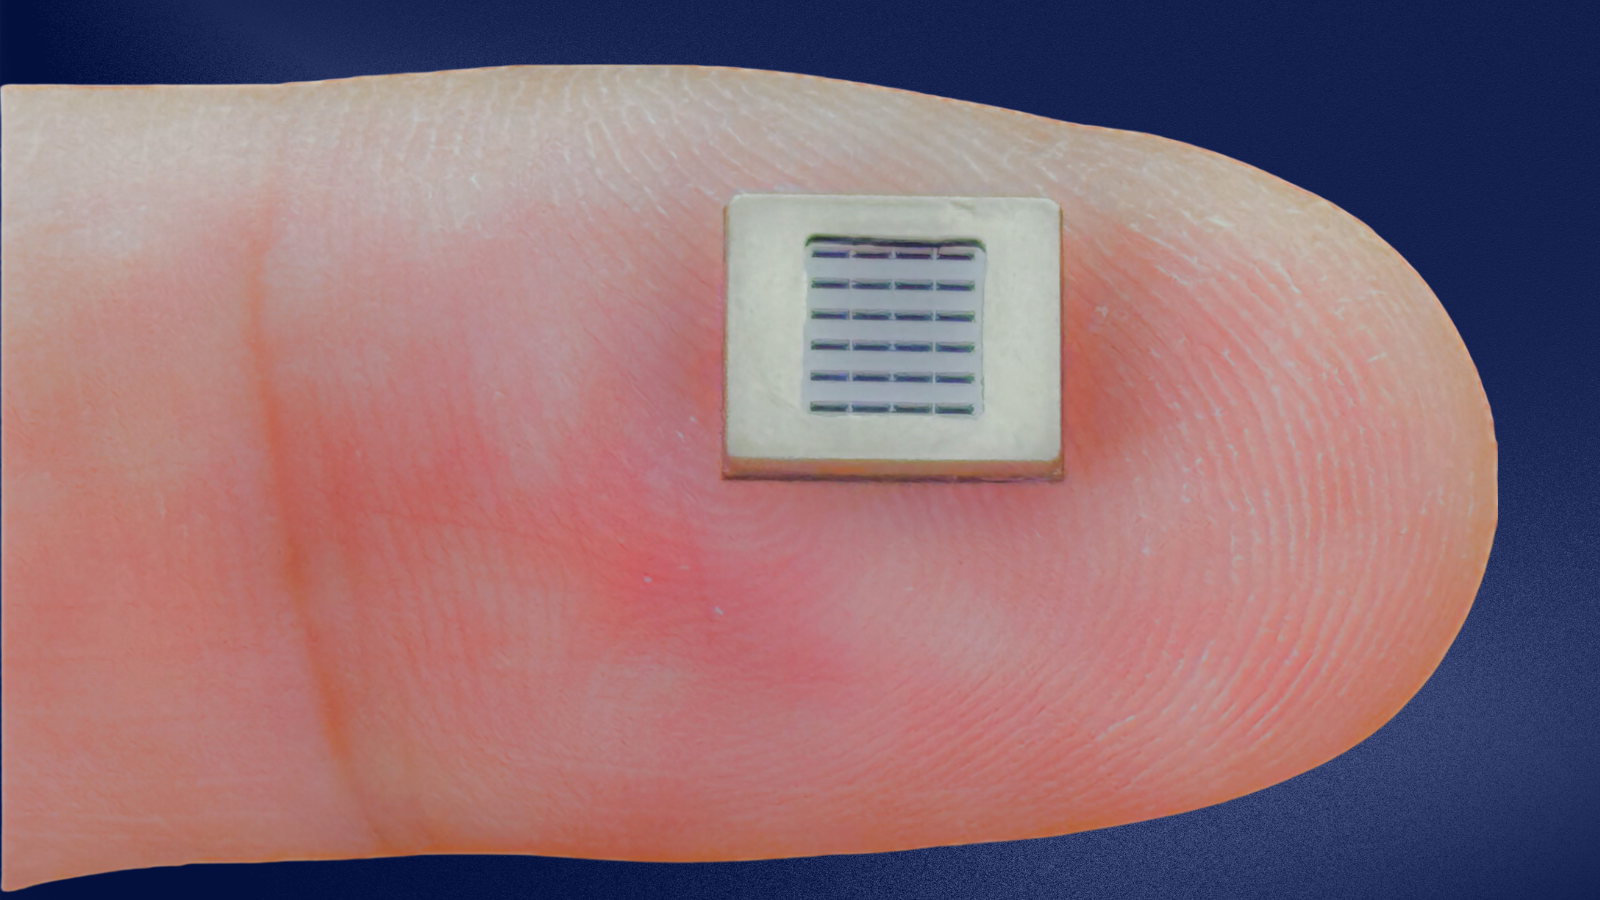 Small chip placed on the center of a fingertip.